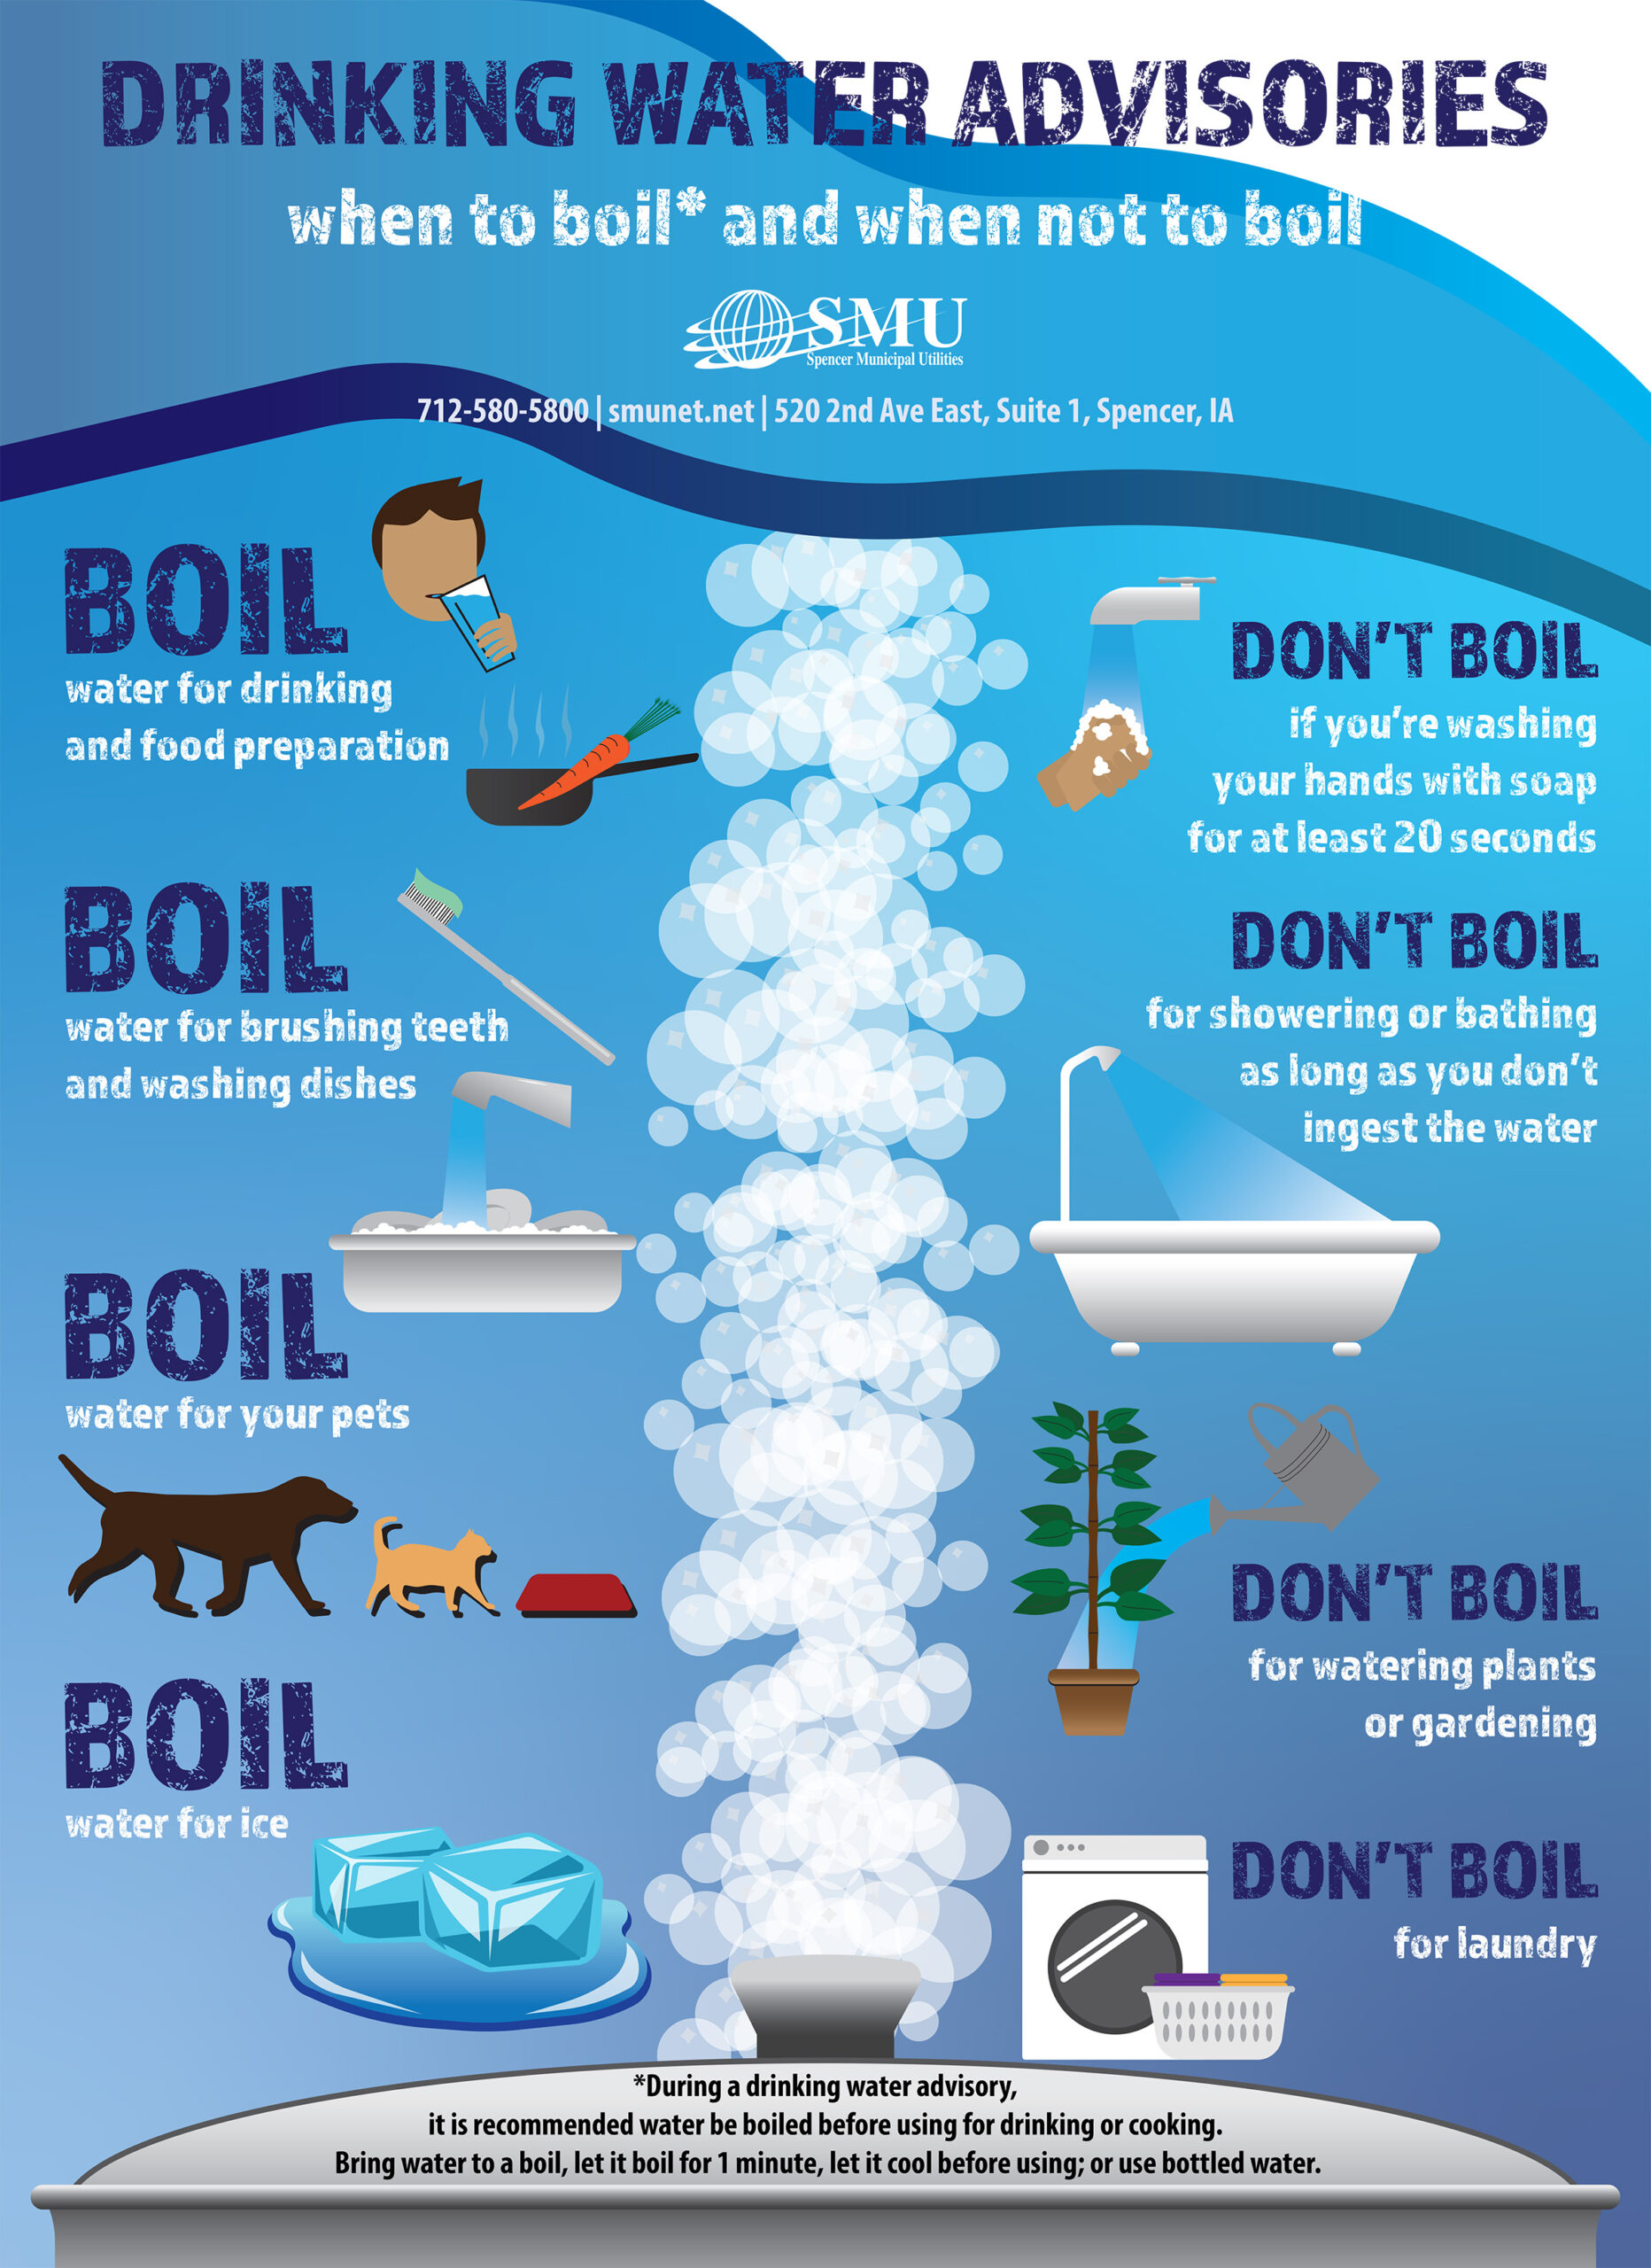 Drinking Water Advisories - when to boil and when not to boil